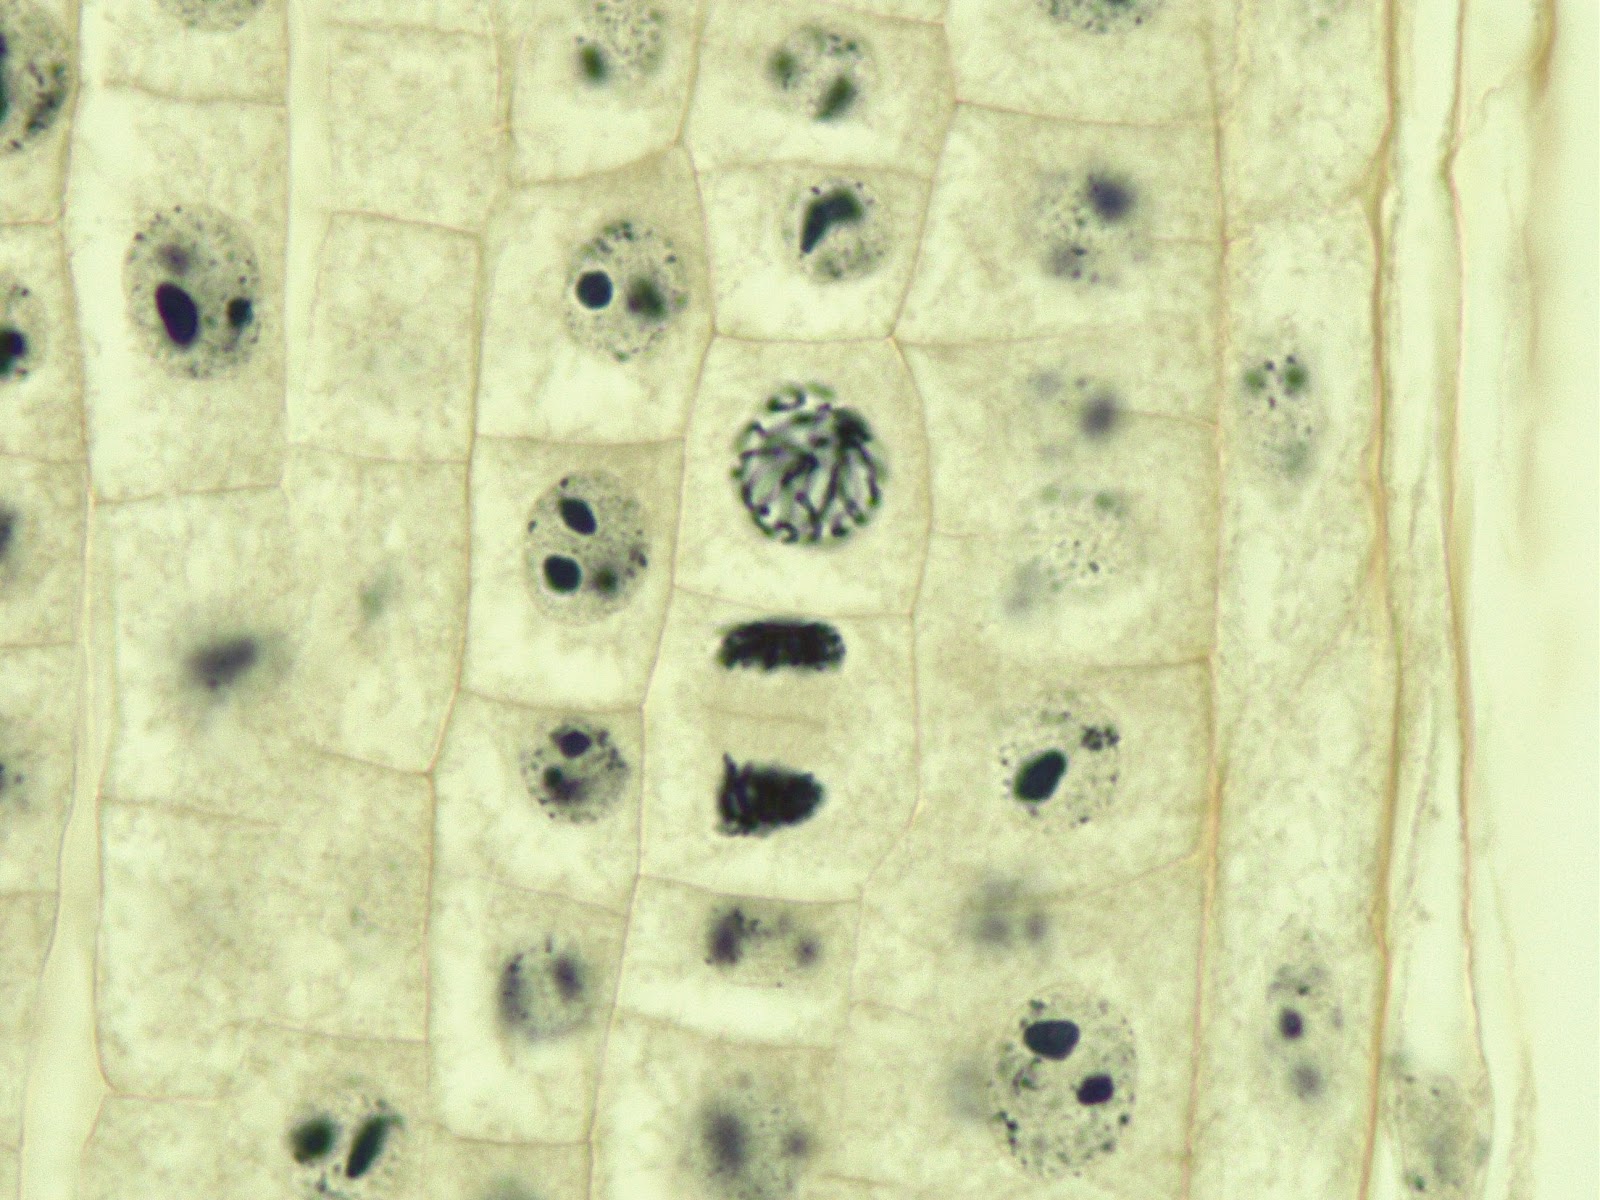 Cytokinesis in onion root tip plant cells shown under the microscope